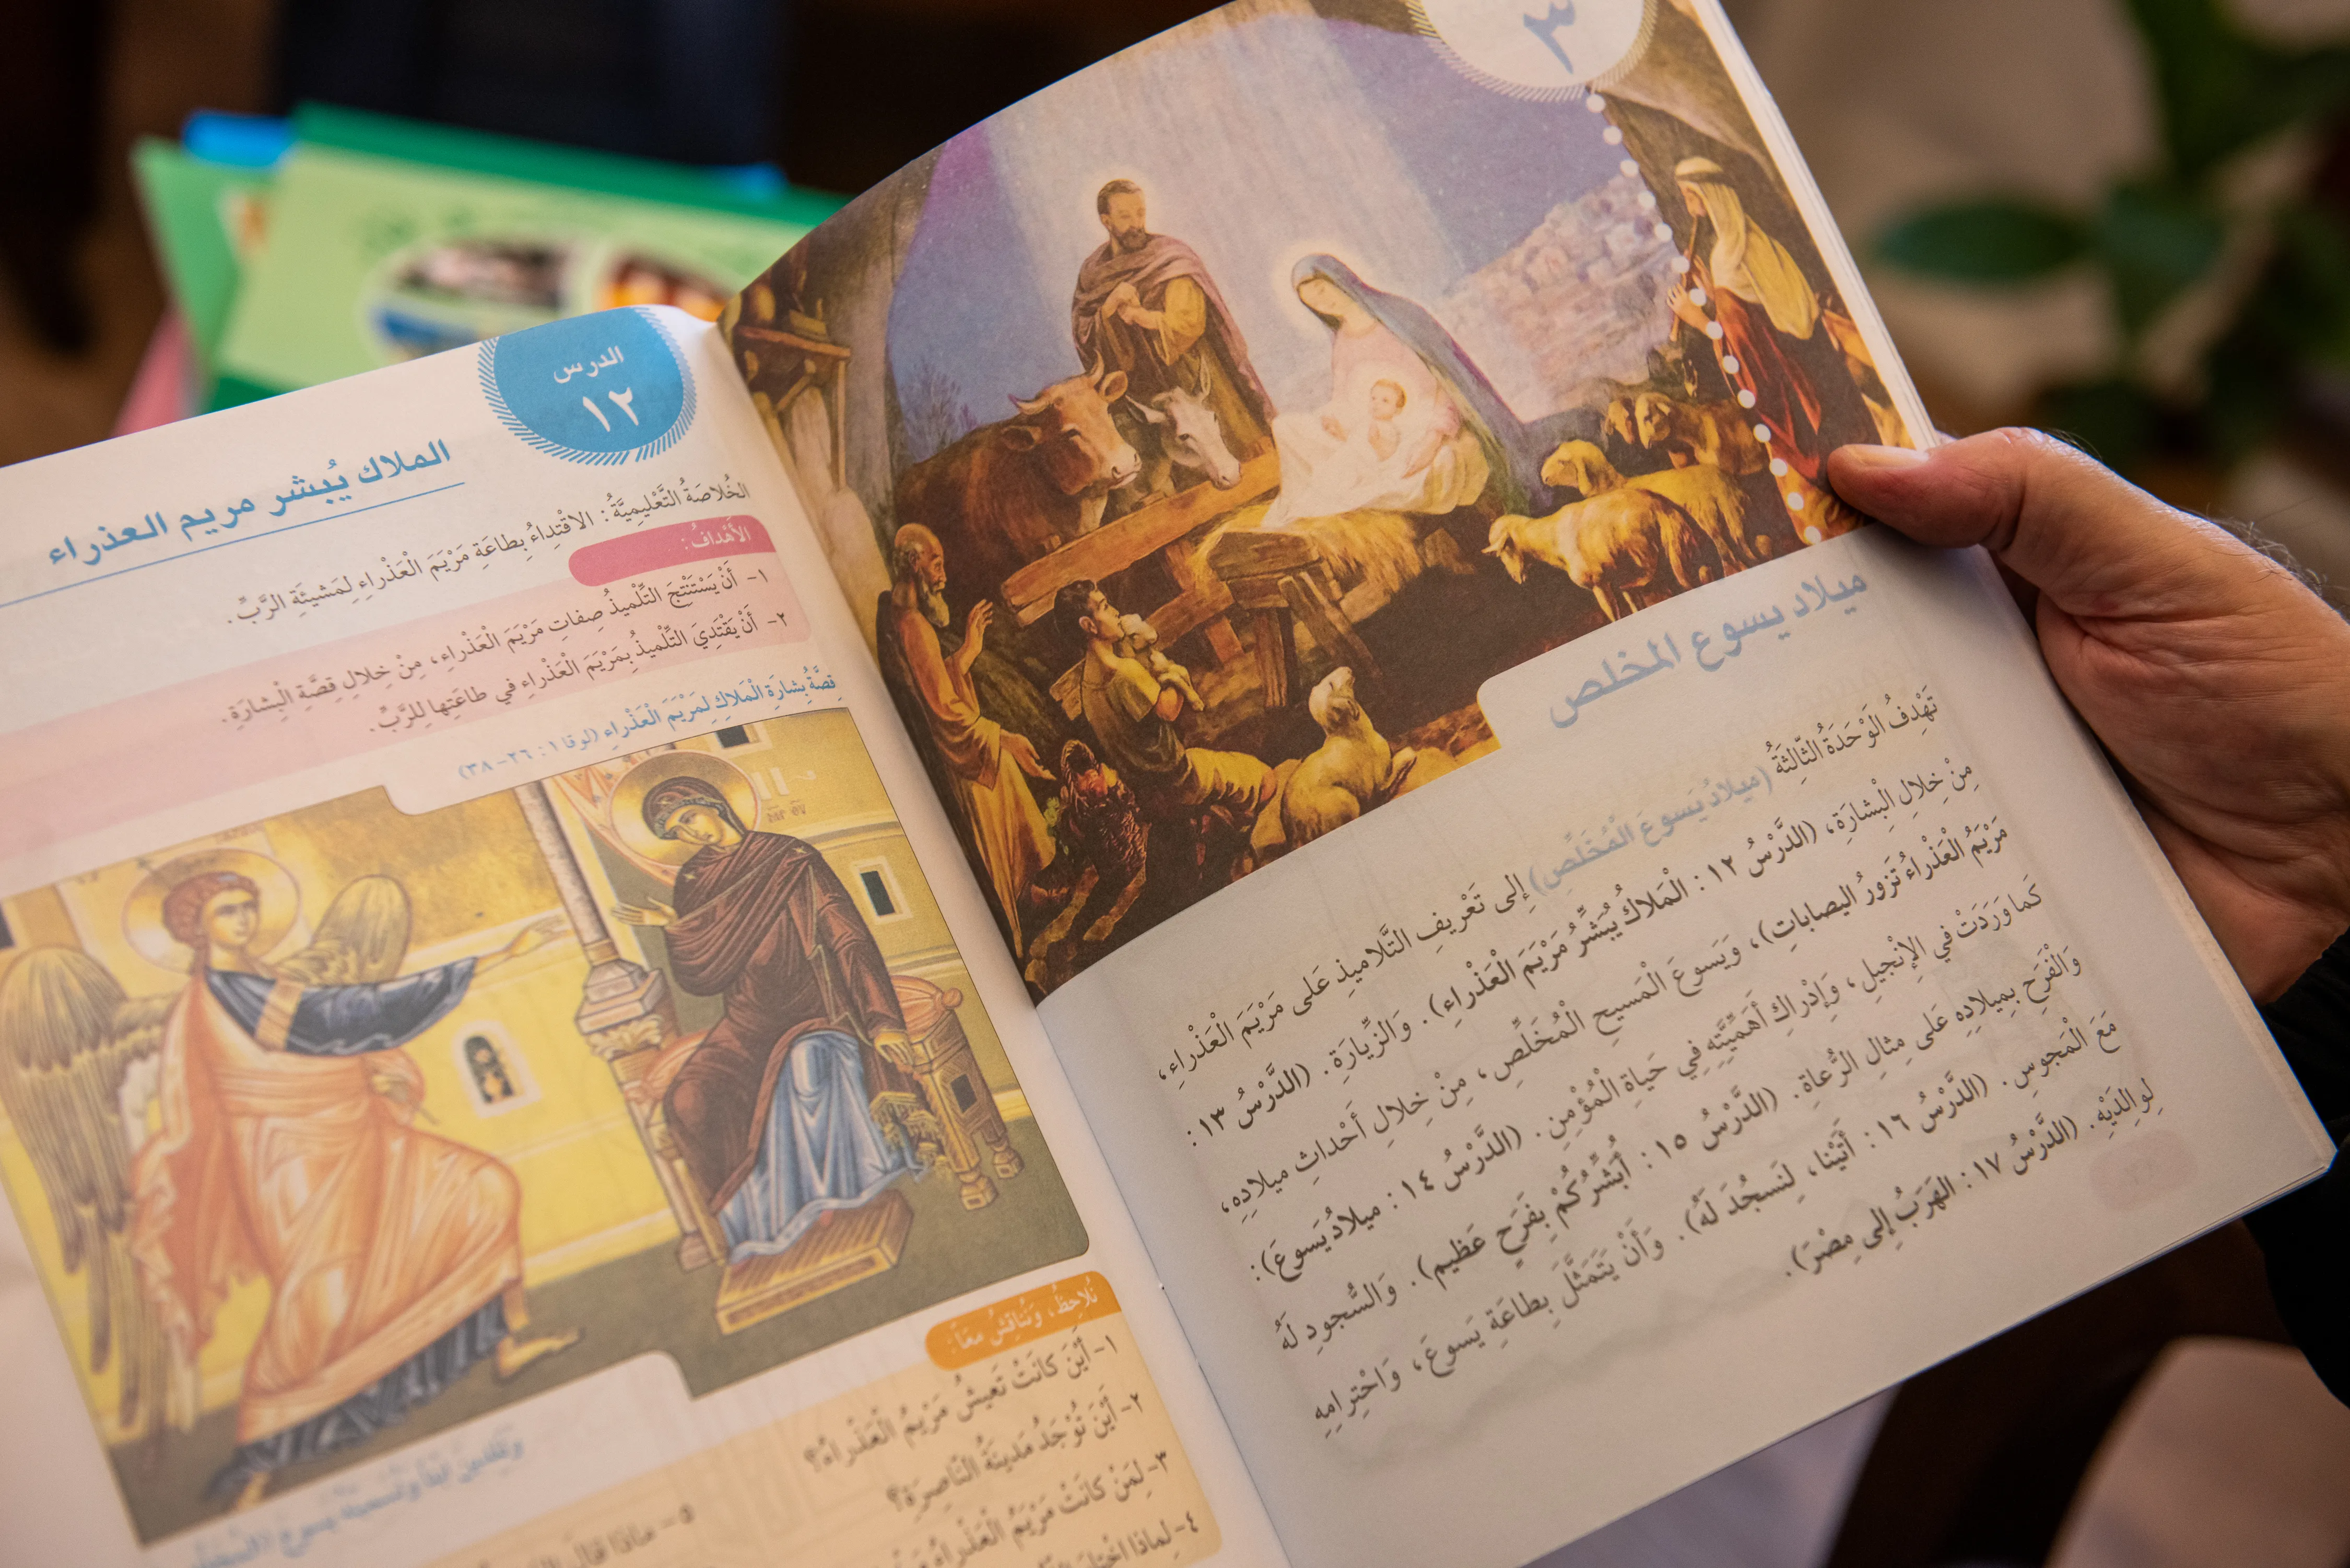 The inside of one of the "ecumenical catechism" books that has been adopted since 2000 in public schools of the Palestinian Authority as a textbook for Christian education. This part is devoted to the presentation of the figure of Mary. Credit: Marinella Bandini